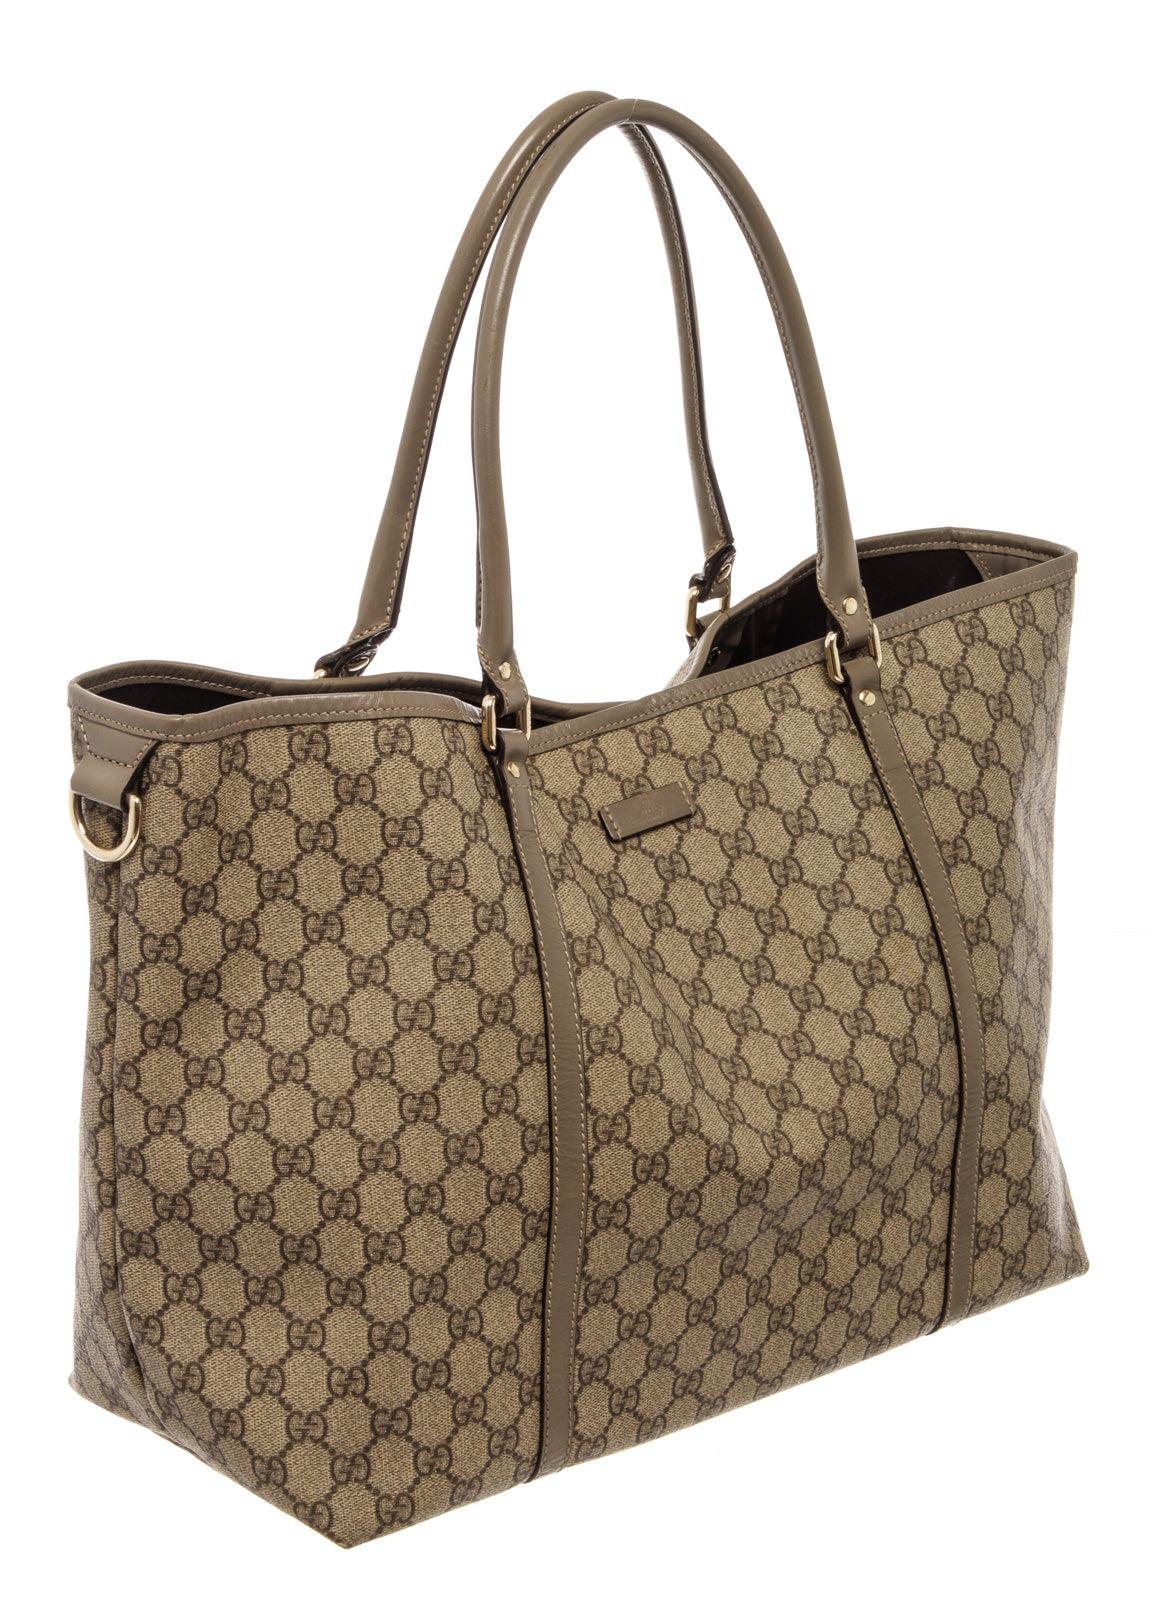 Gucci tote bag features a beige GG Monogram canvas body with brown PVC leather trim, dual rolled leather straps, gold-tone hardware, an open top with a magnetic snap button closure, brown woven canvas lining and interior zip and slip pockets.

